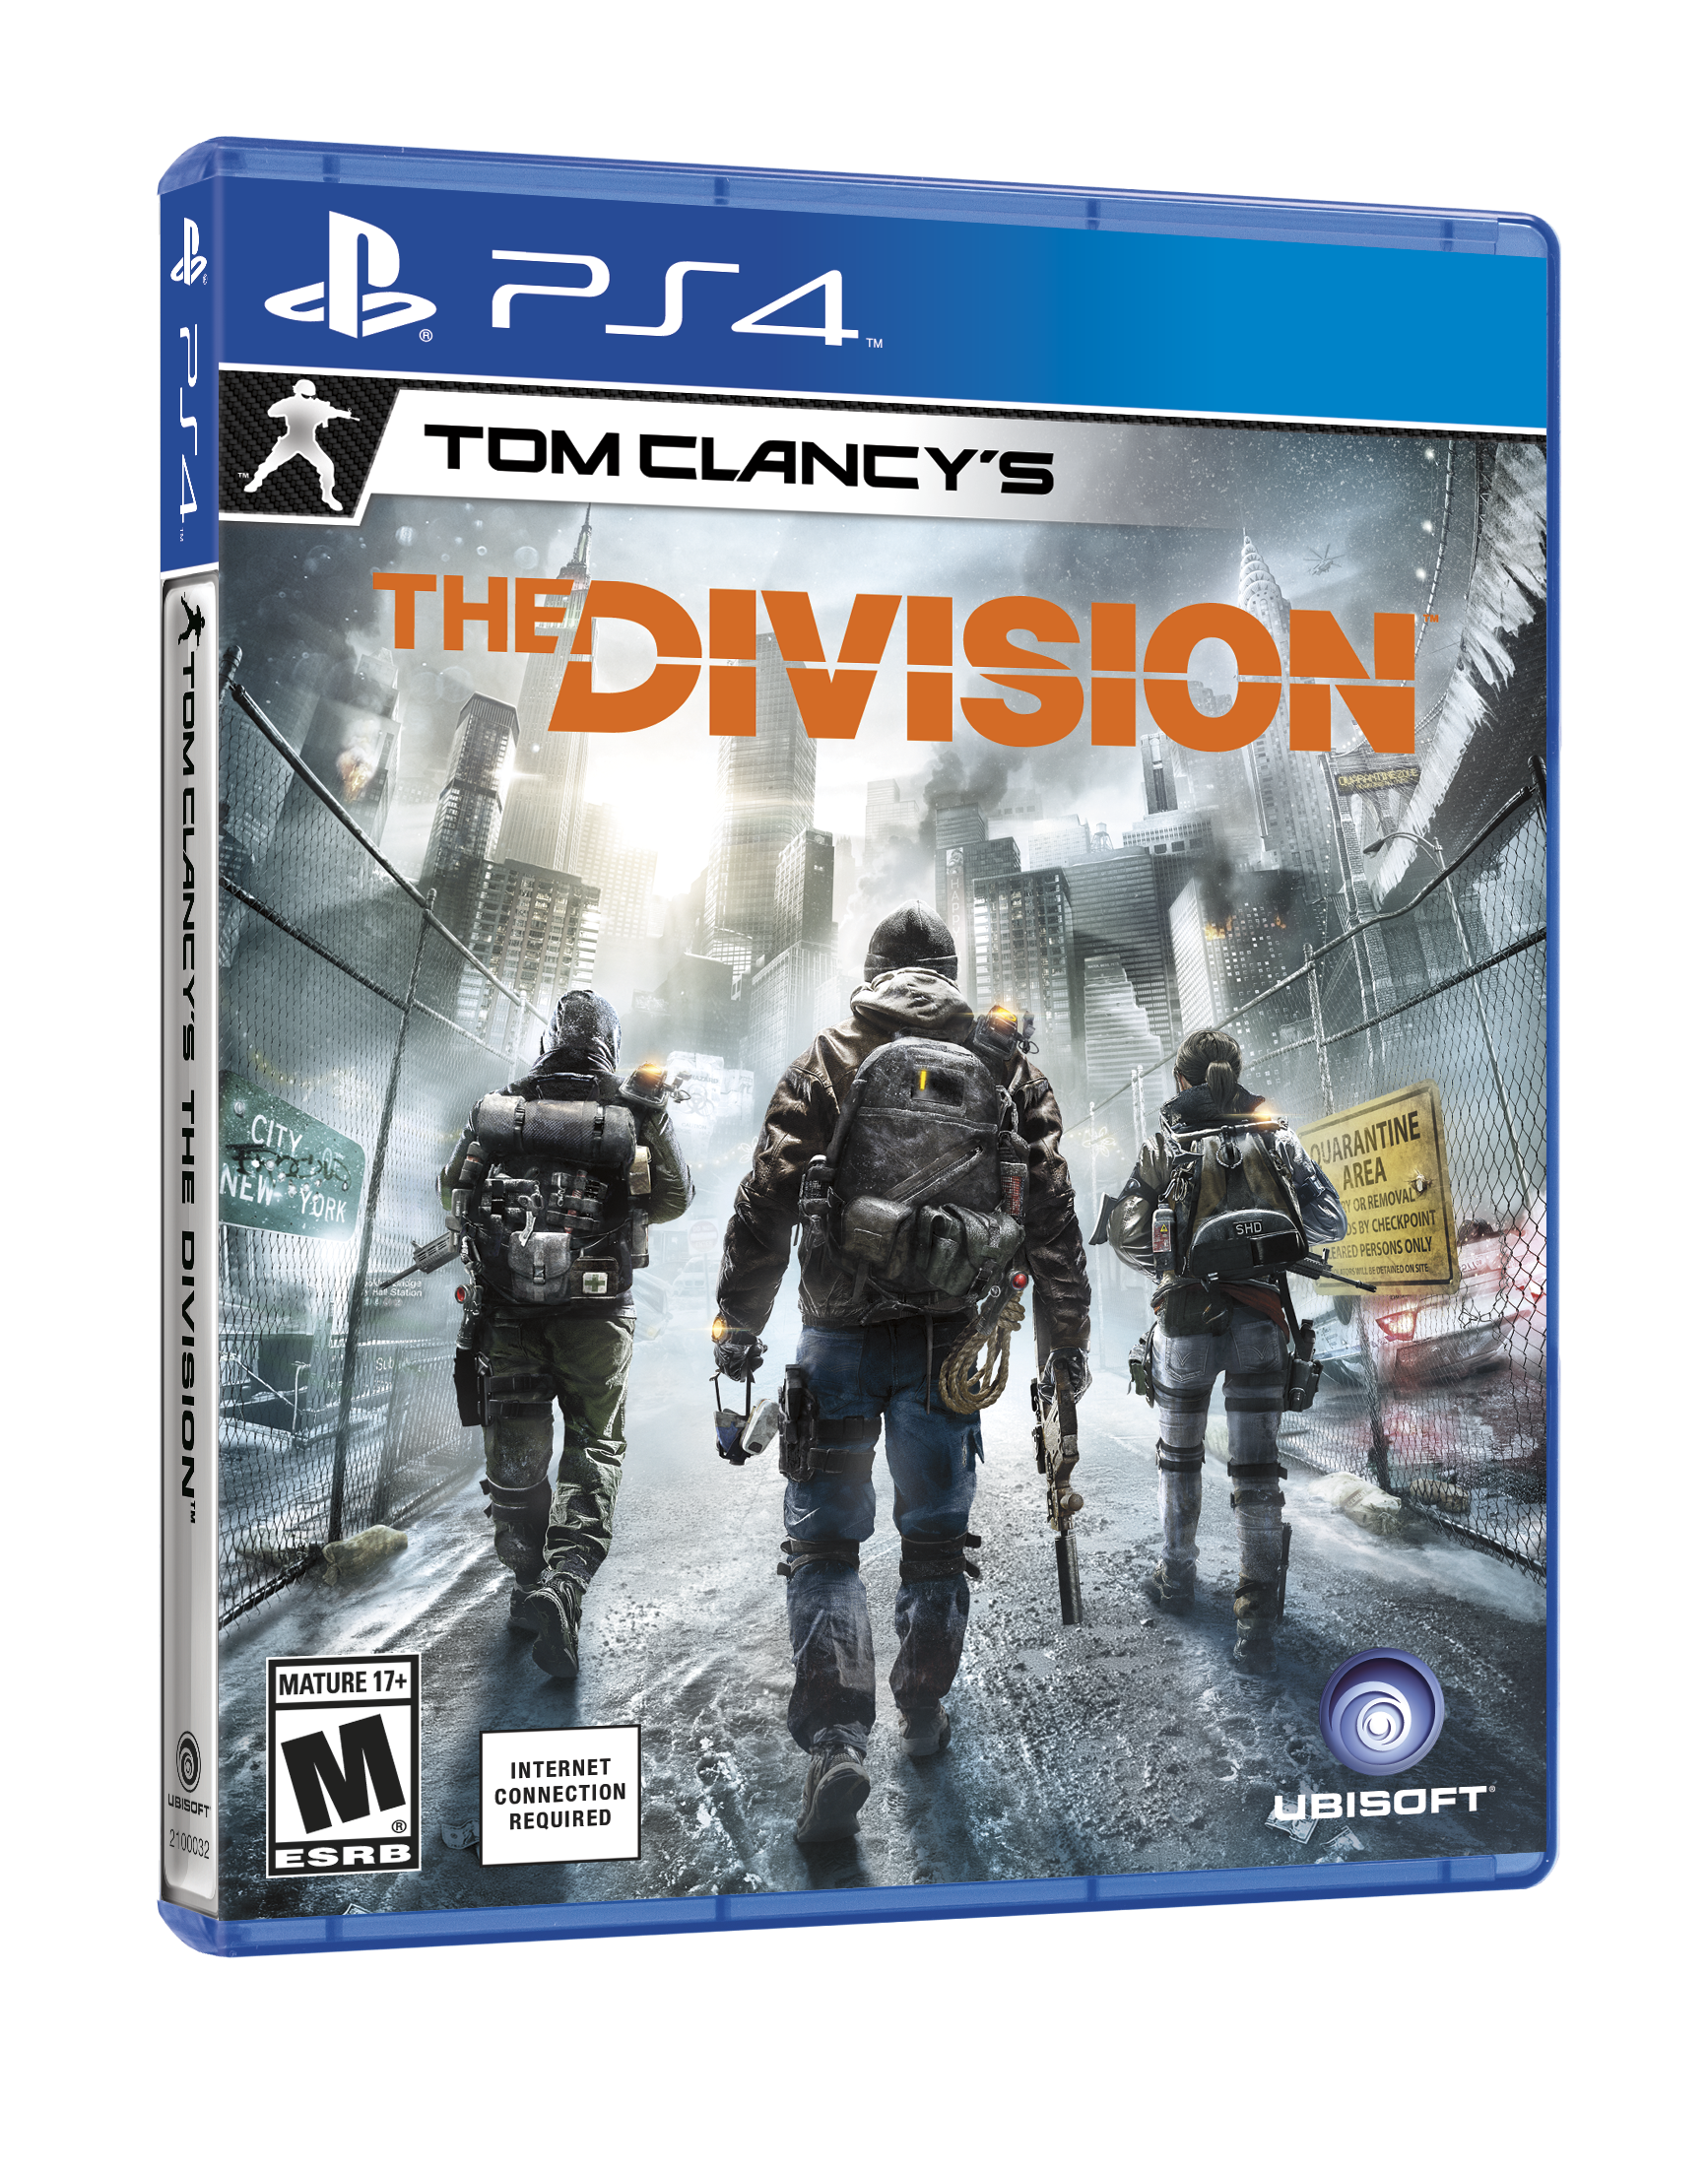 Ubisoft Tom Clancy's The Division for PlayStation 4 (PS4)